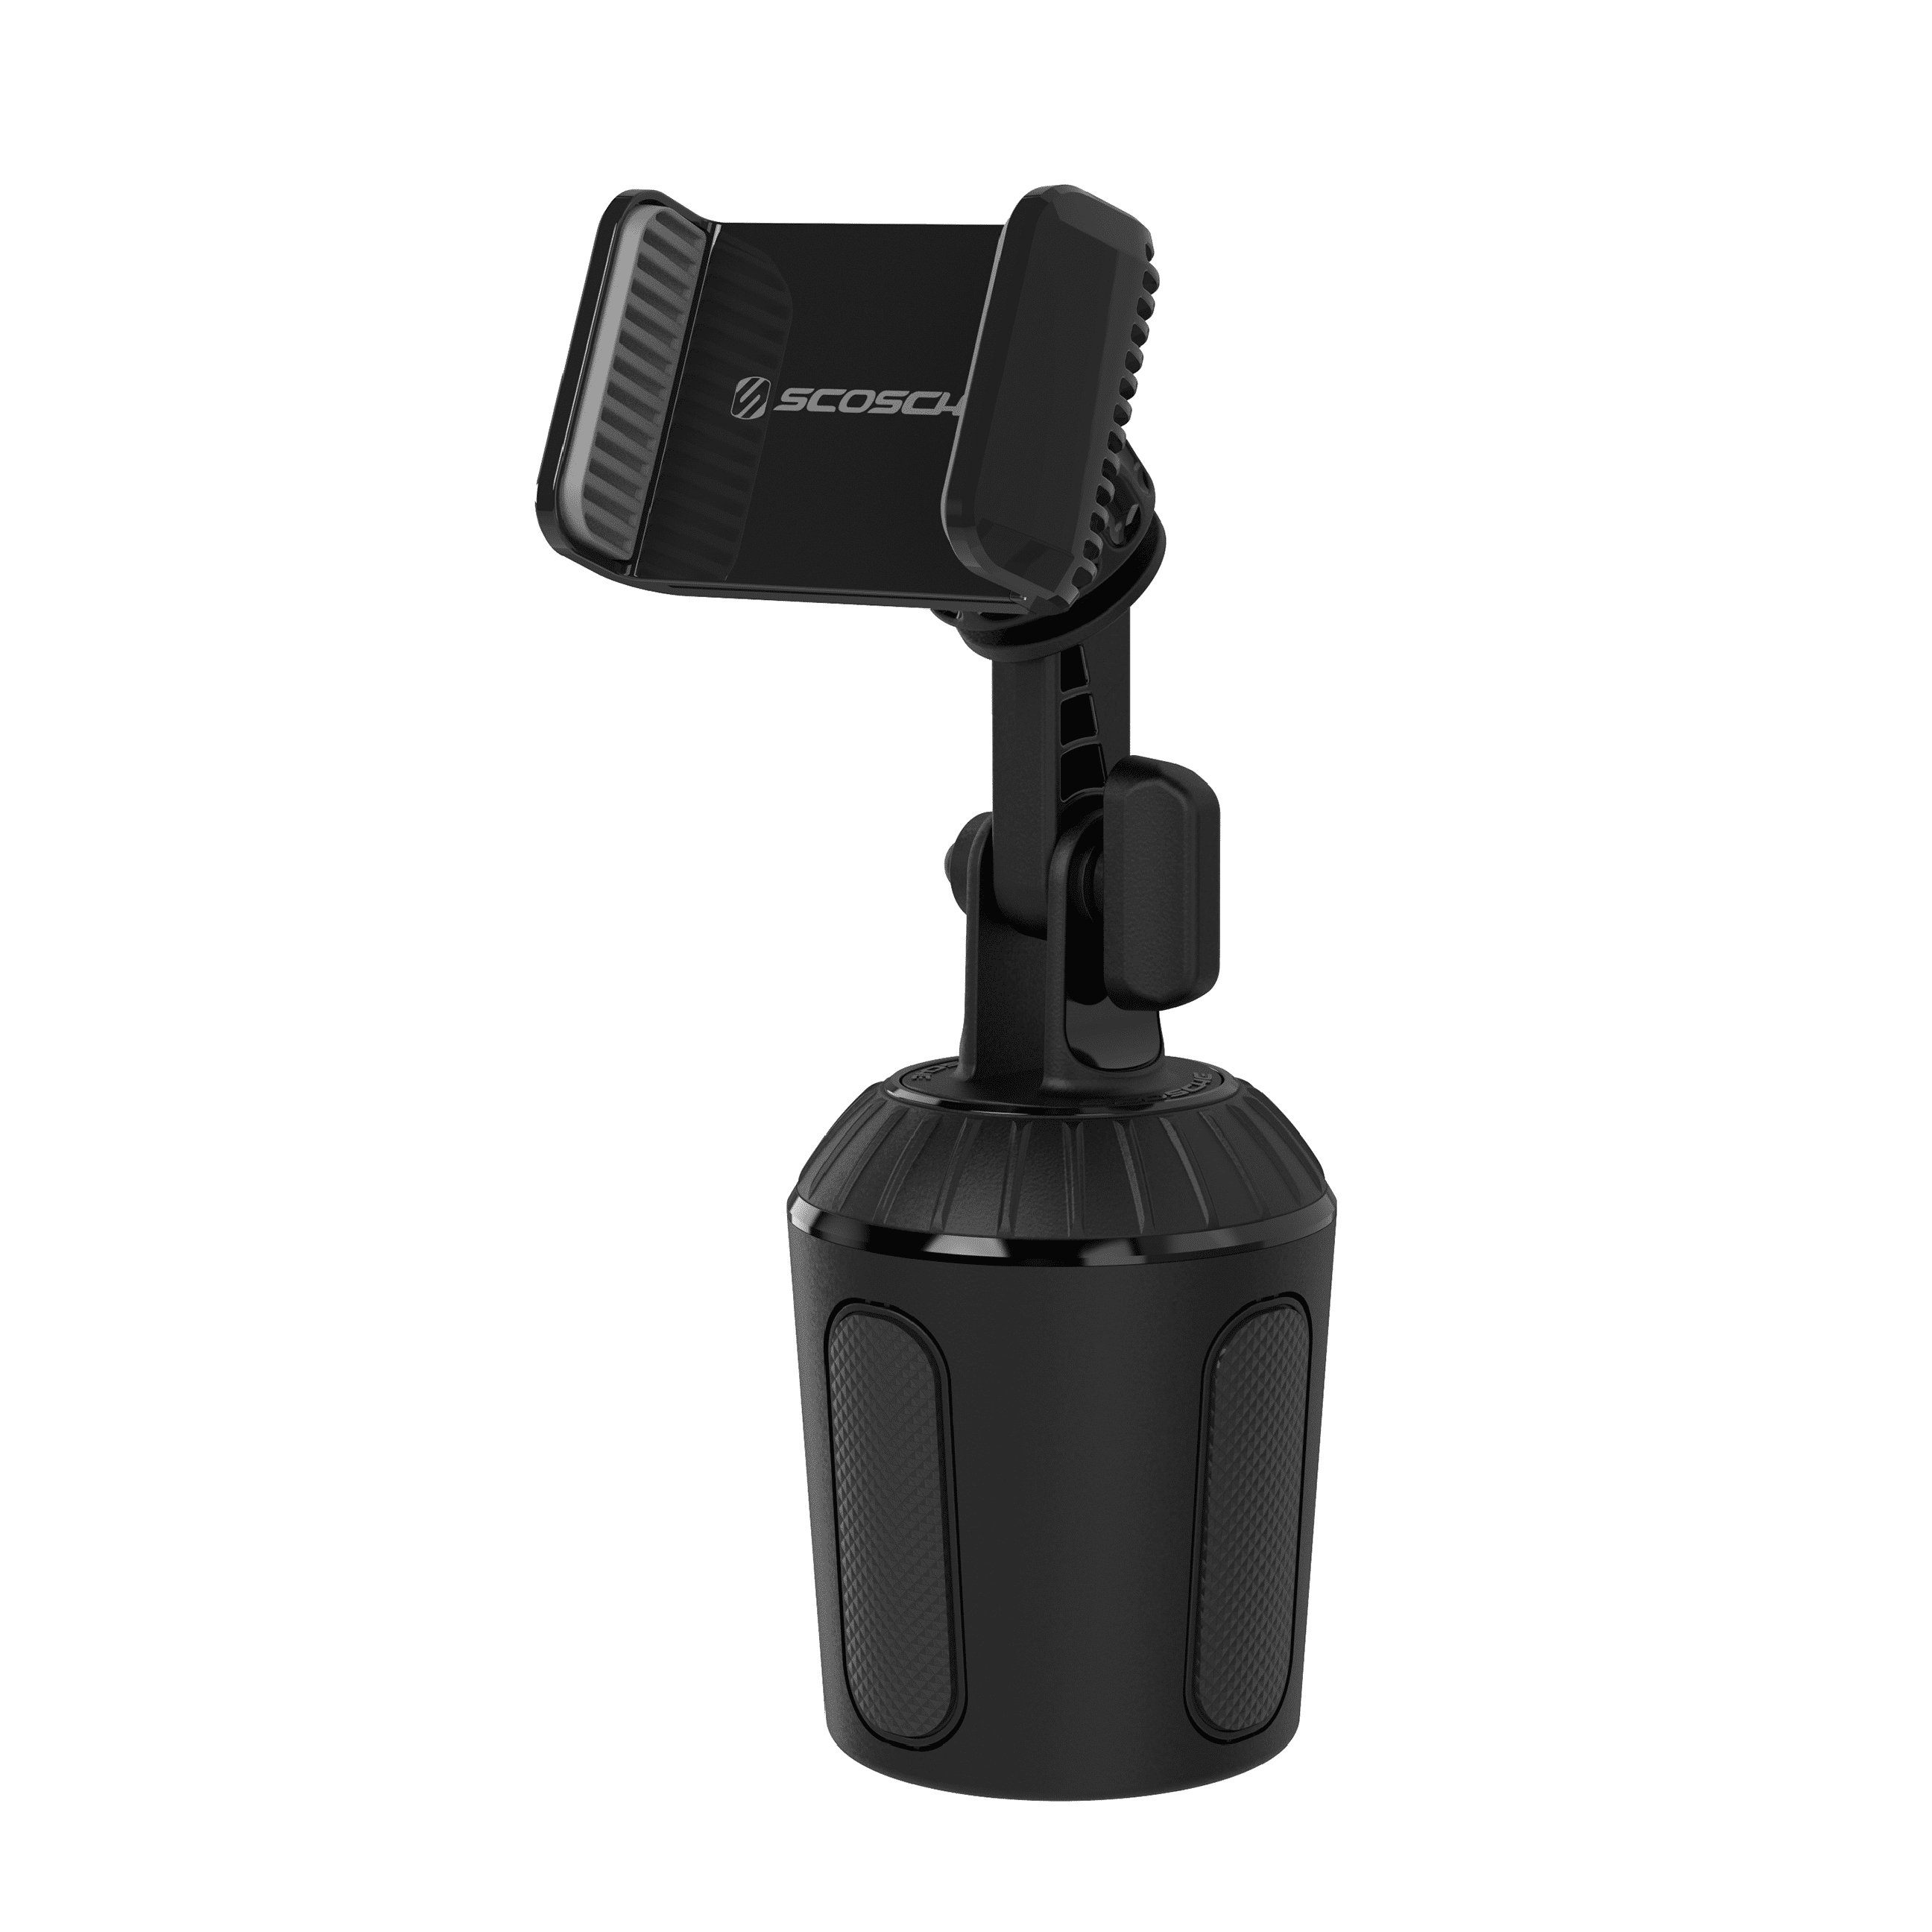 Scosche Ghcupm-SP1 Gravity Drop Cup Phone Holder Mount with Phone 